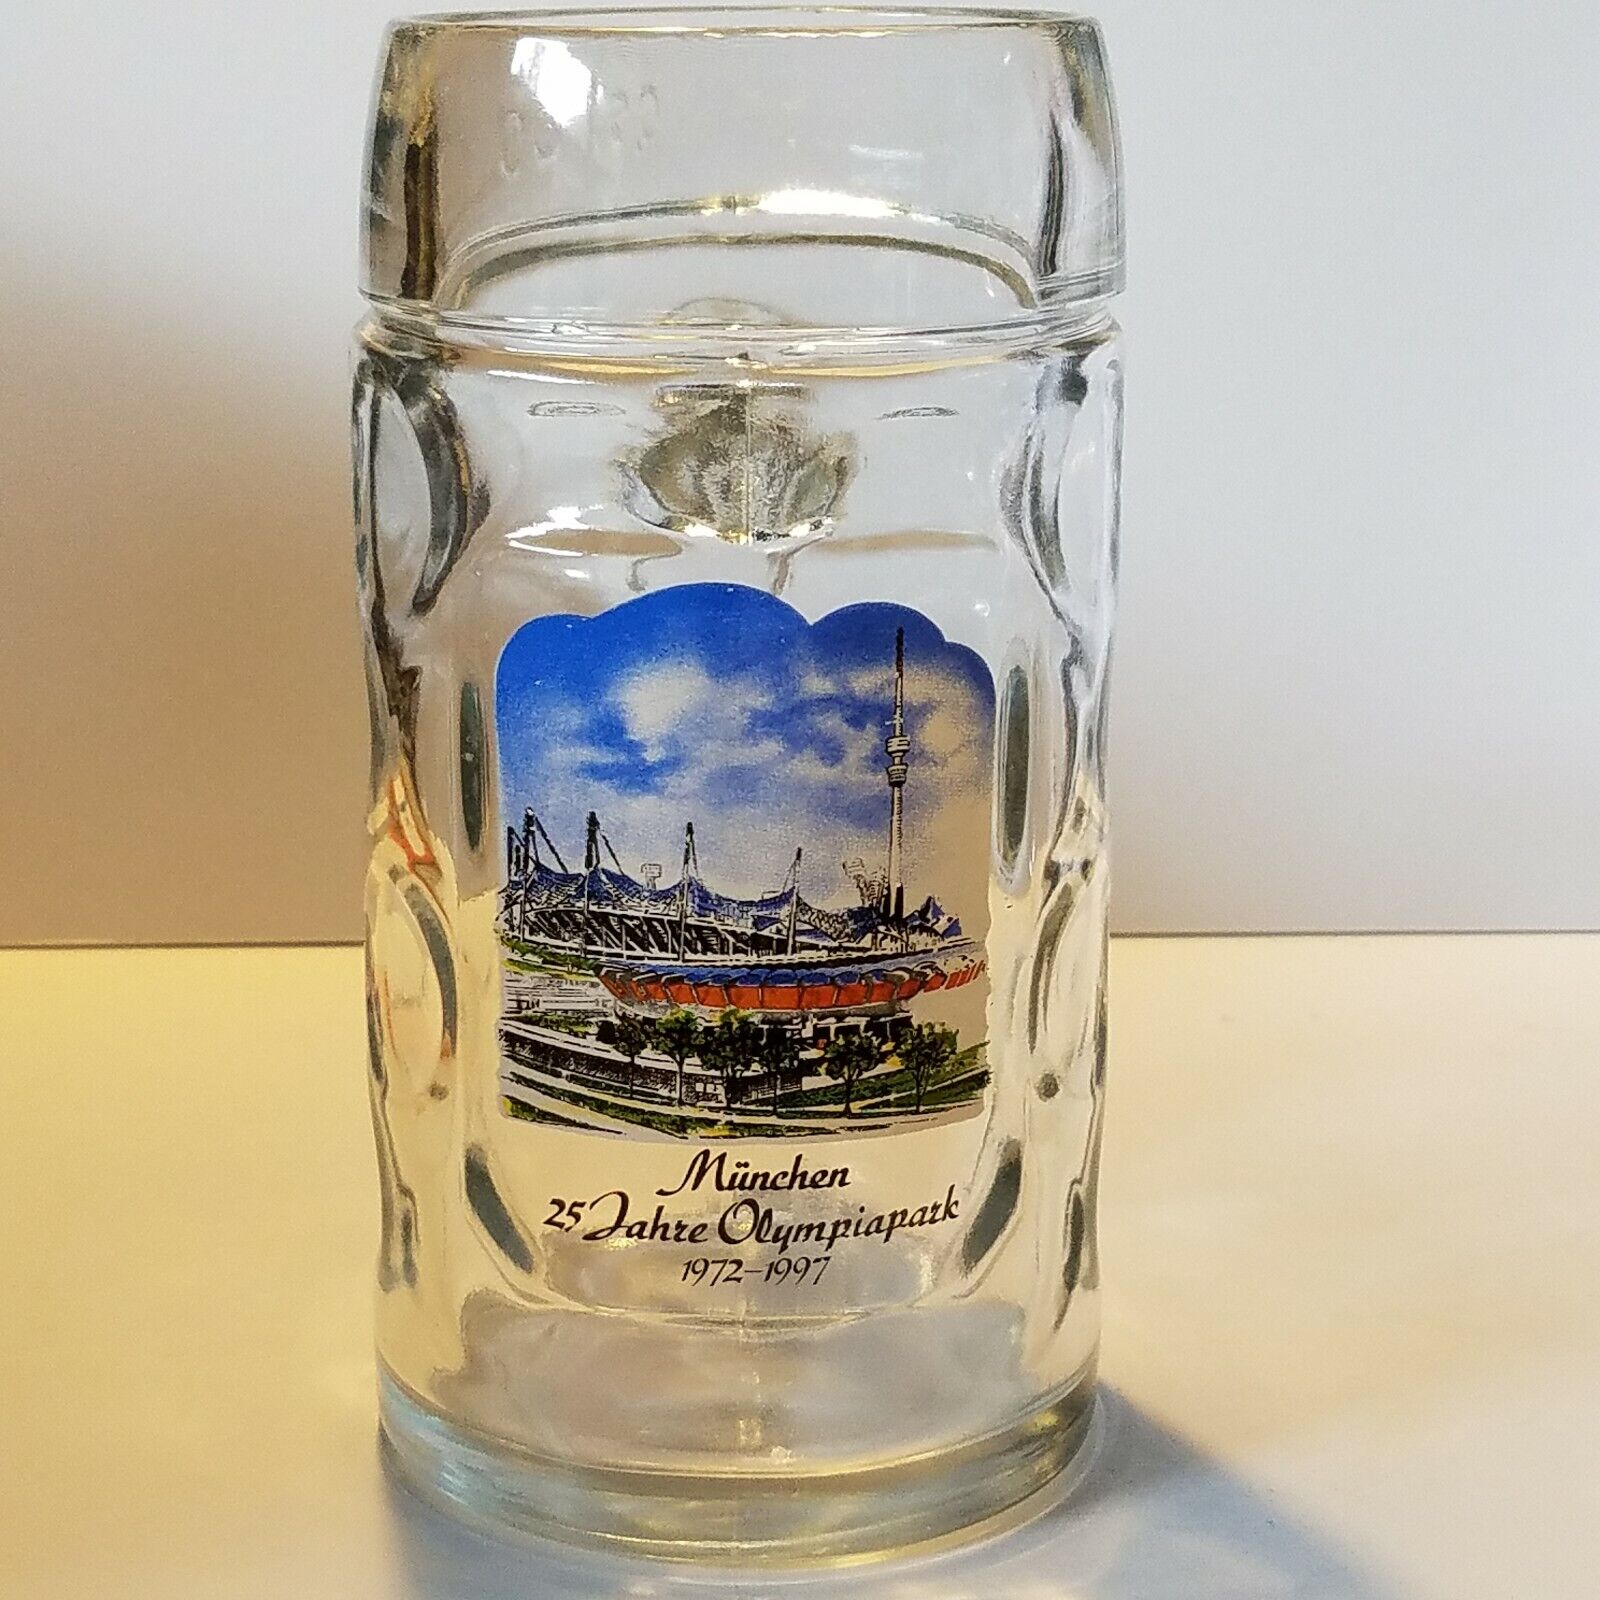 Munchen 25 Jahre Olympiapark 1997 Event Glass Bier Beer Thumbp...